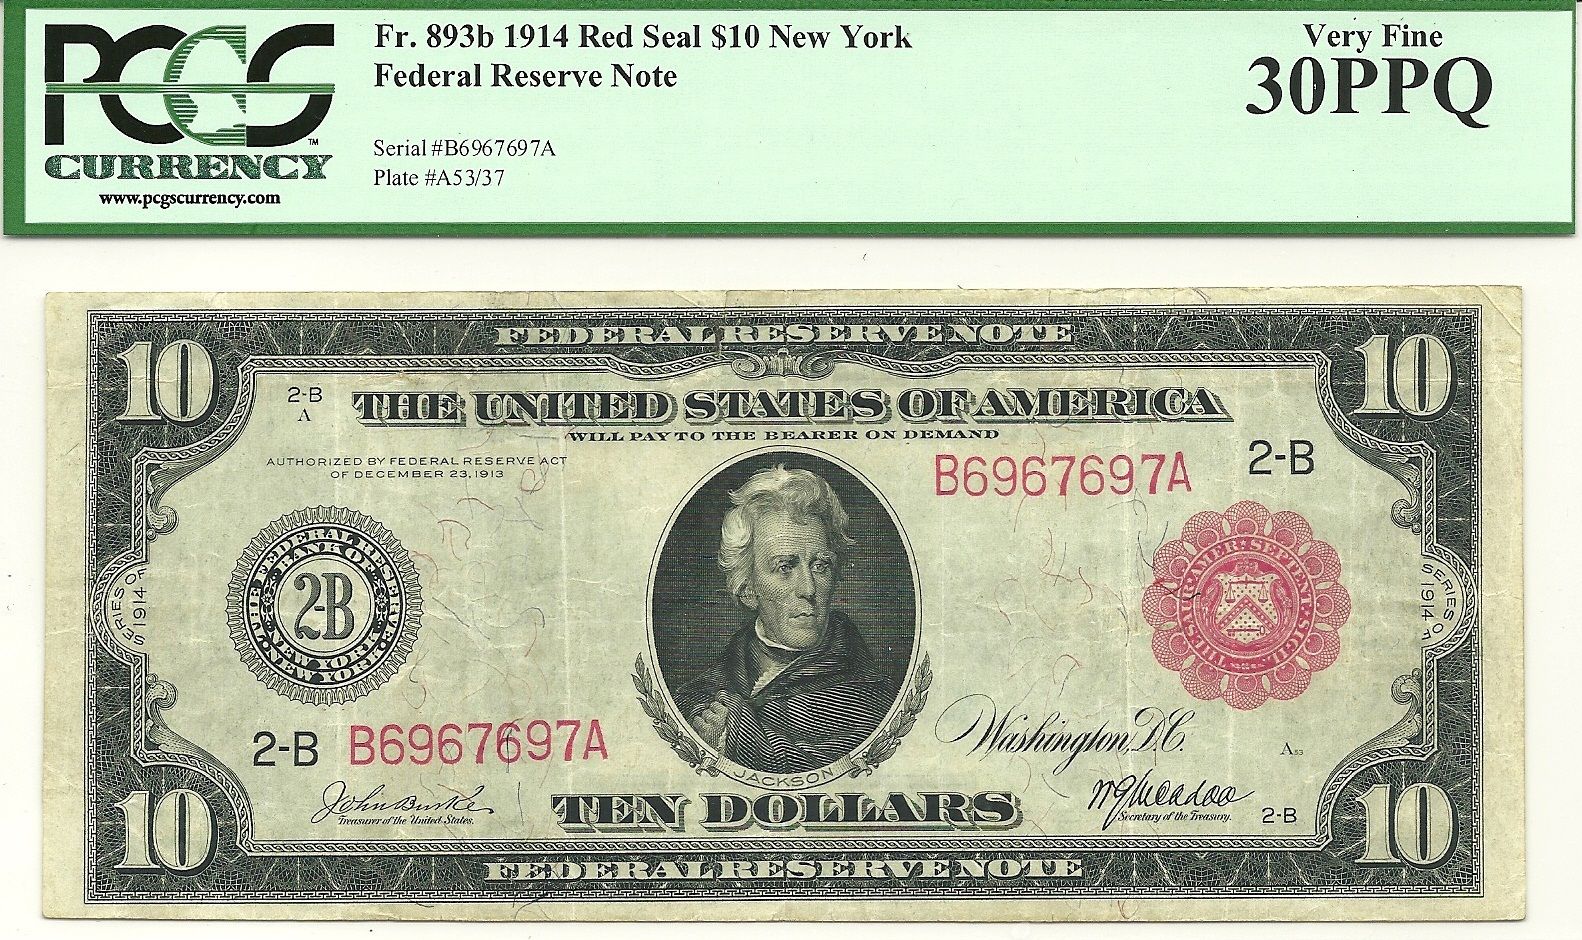 1914  $10 RED SEAL FEDERAL RESERVE NOTE - NEW YORK  SUPER PCGS VERY FINE 30 PPQ